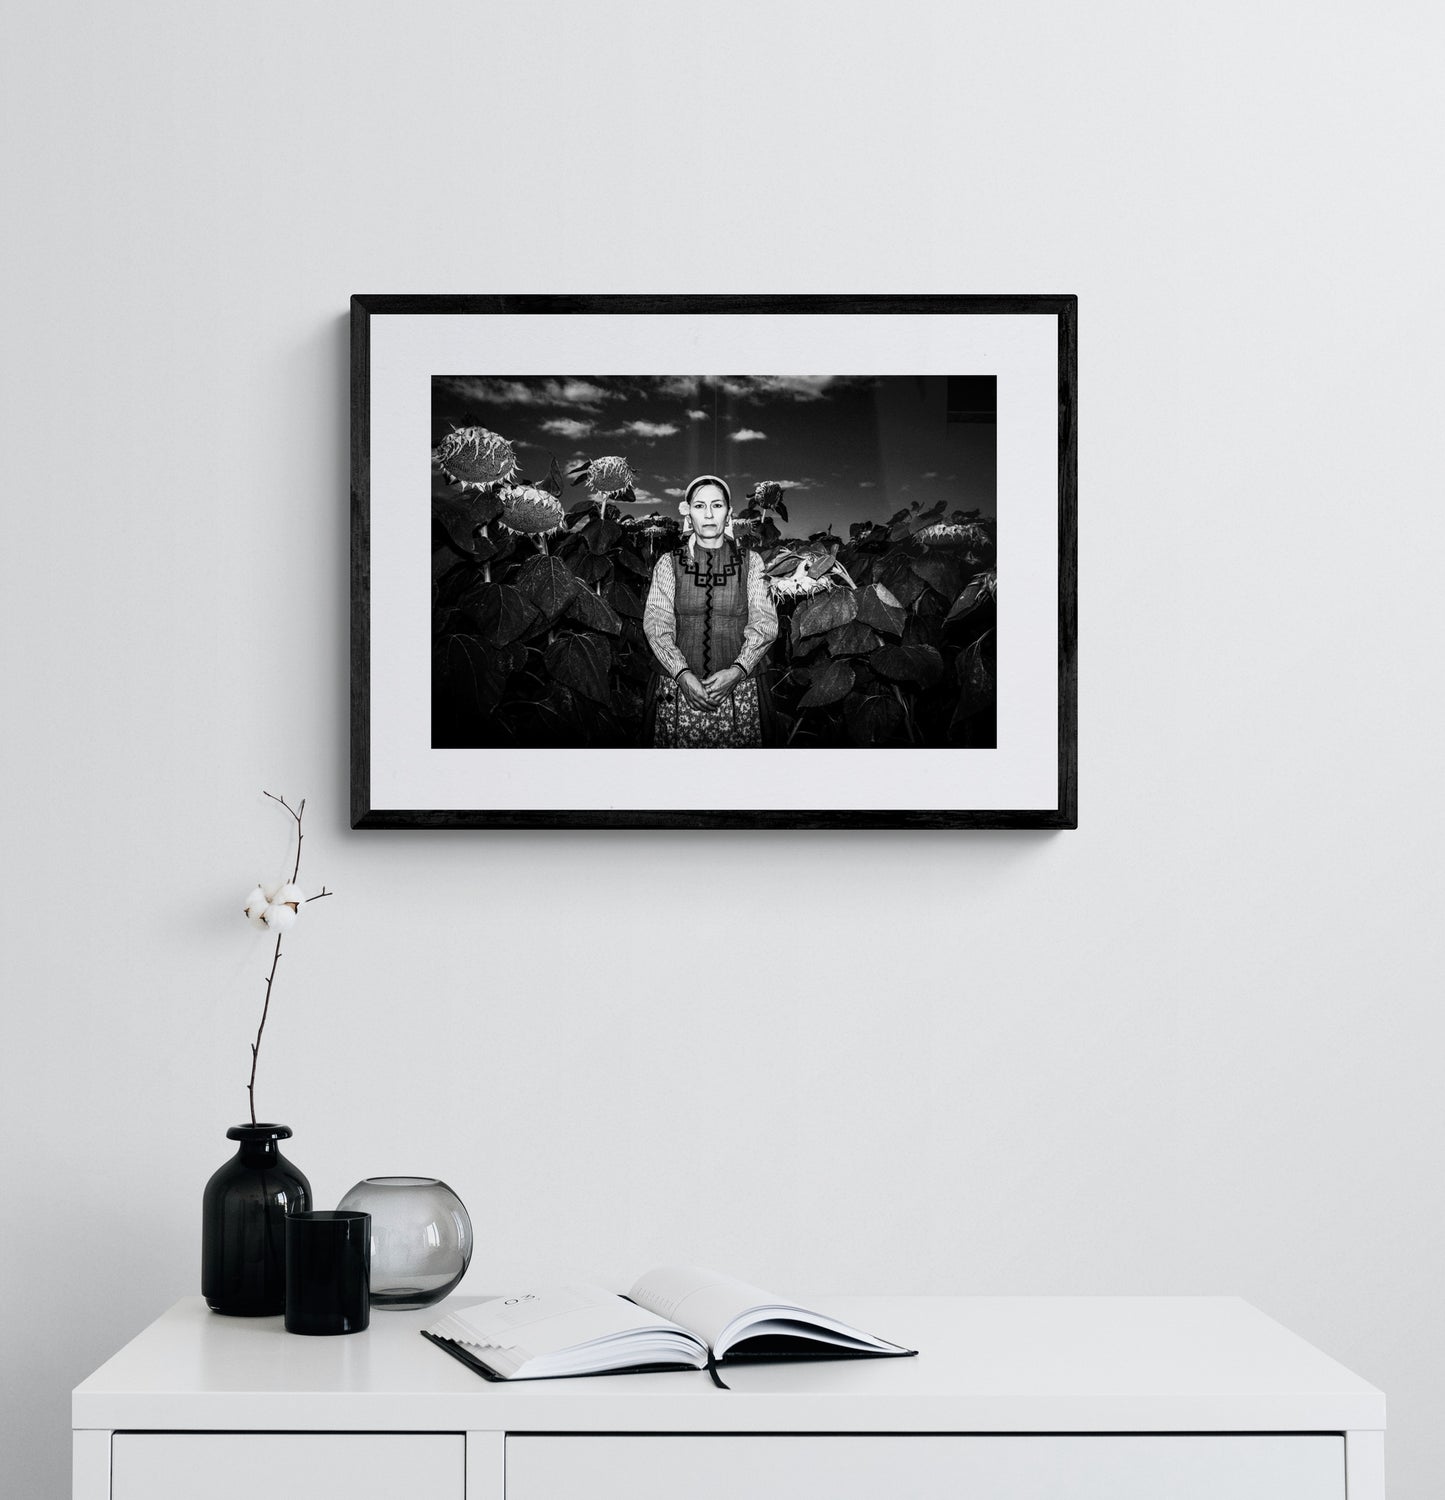 Black and White Photography Wall Art Greece | Costume of Vyssa Thrace by George Tatakis - single framed photo